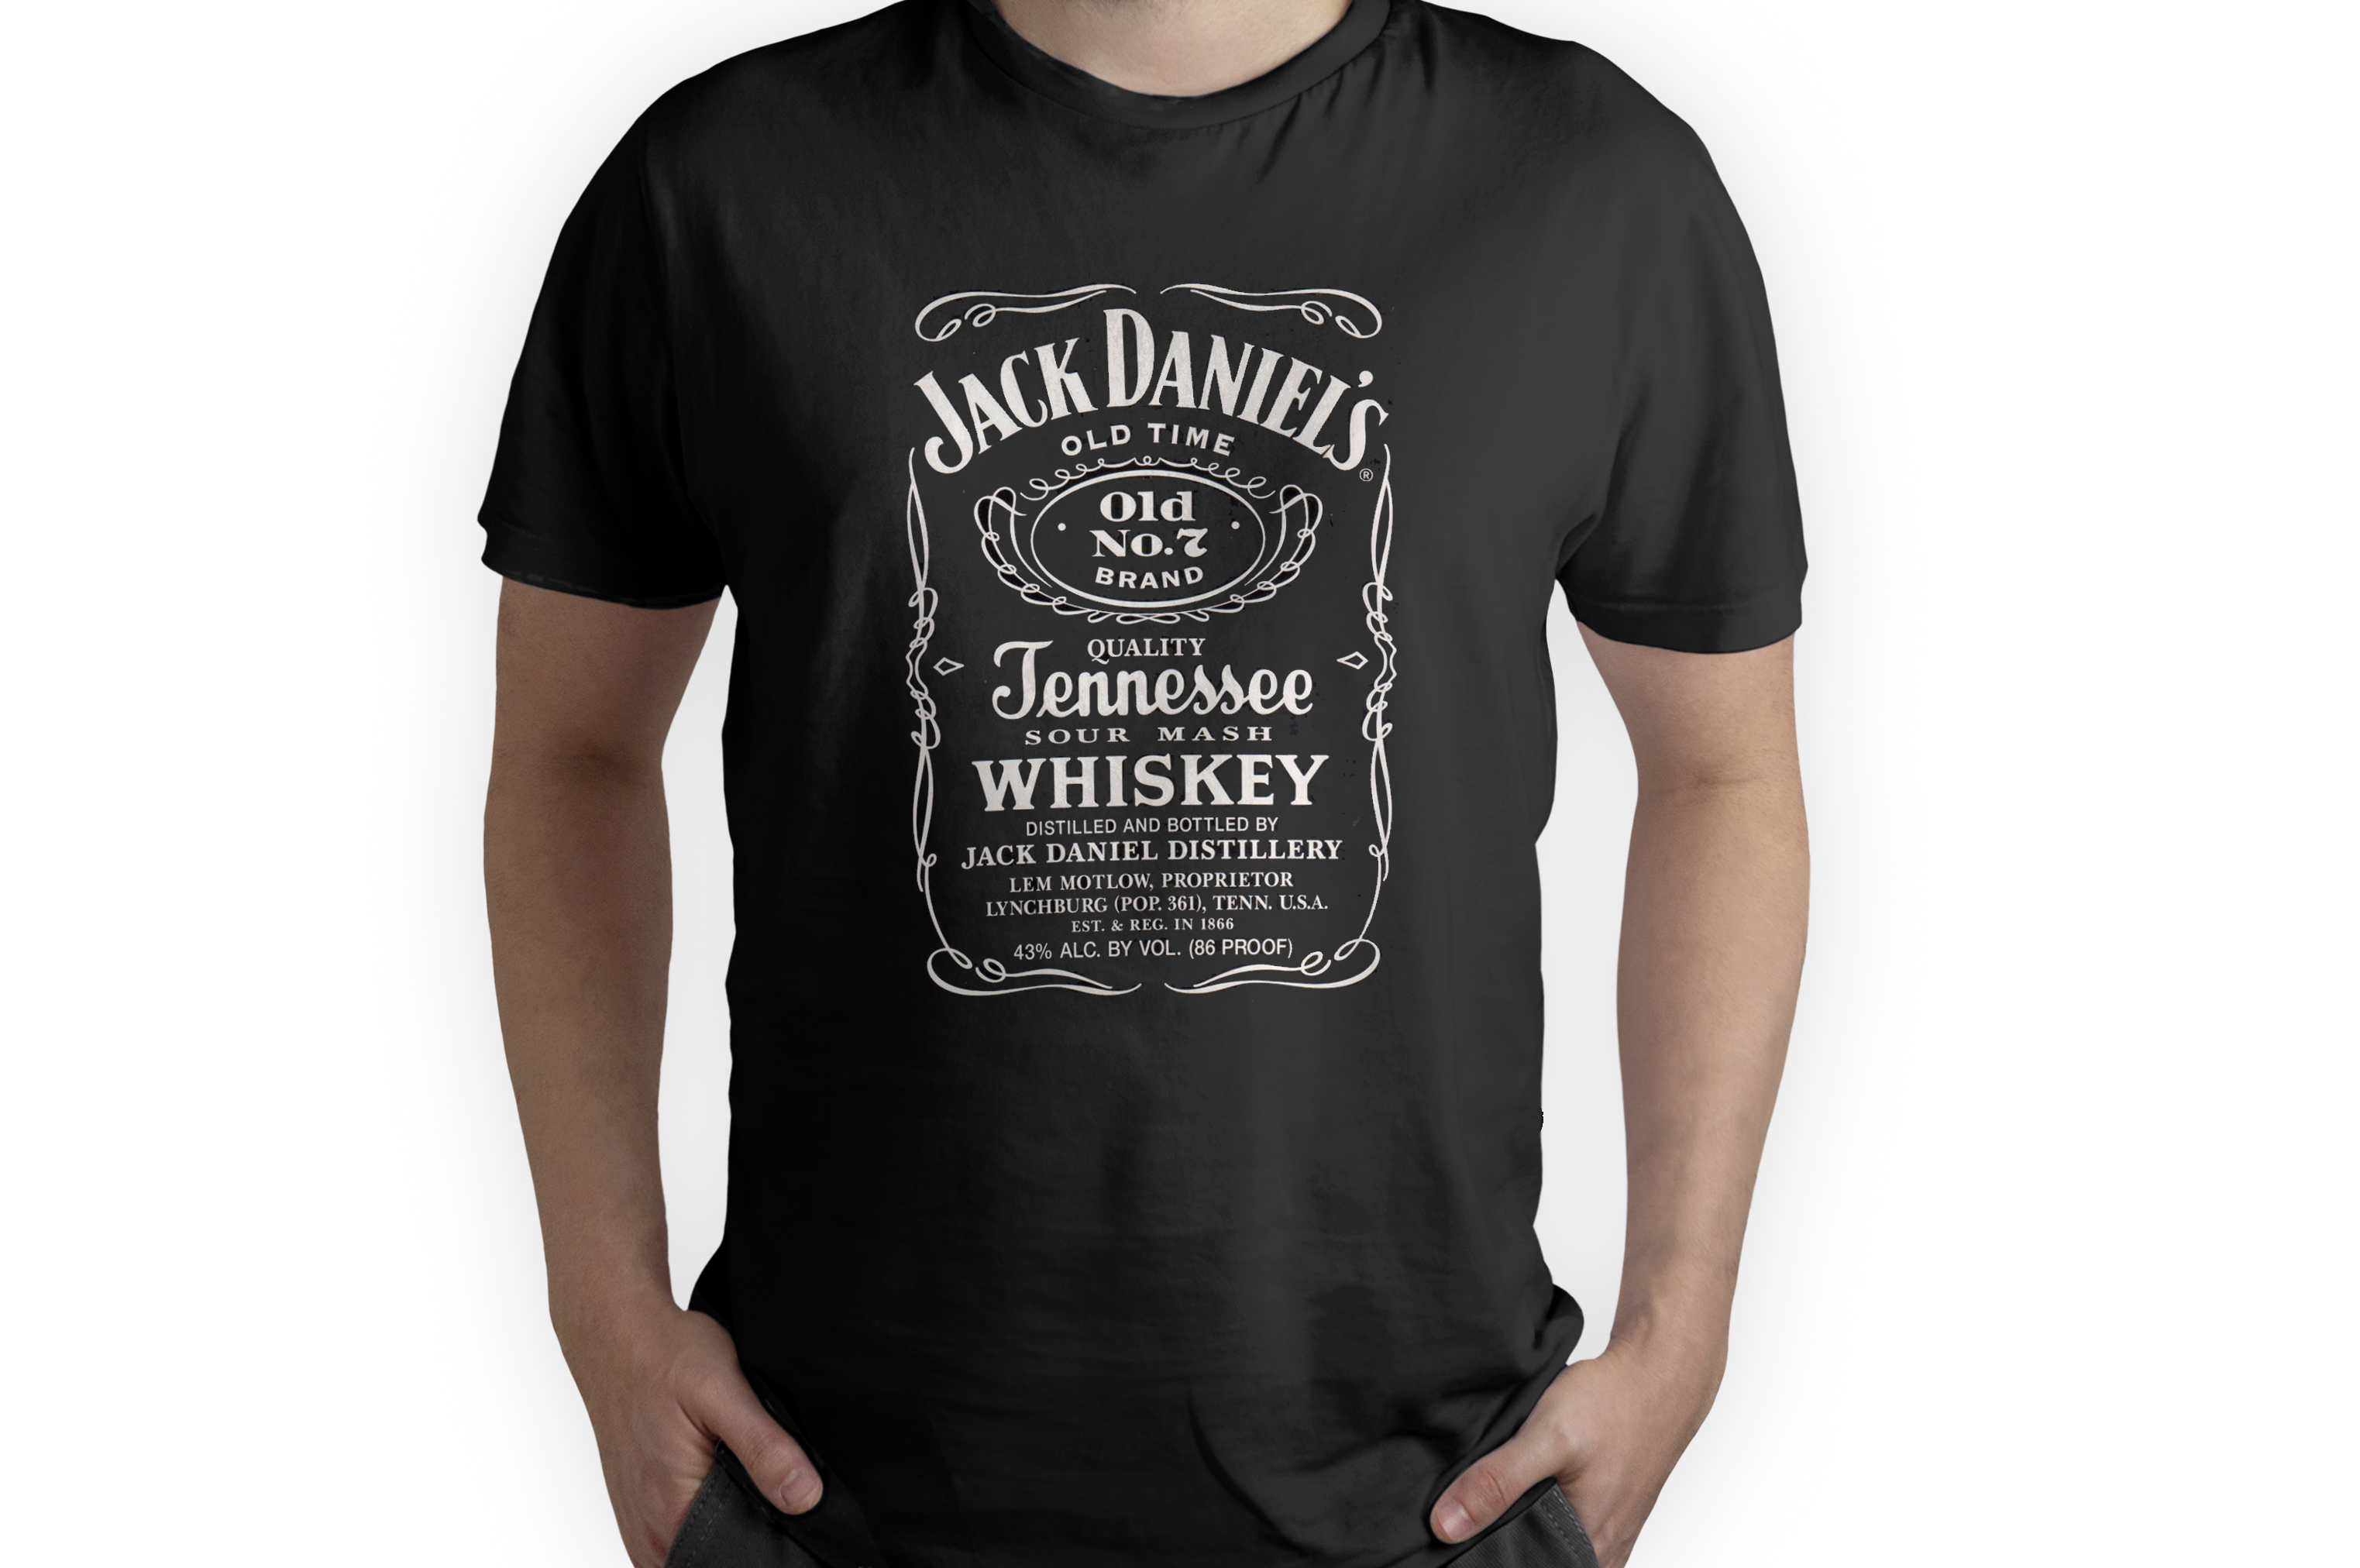 Jack Daniels Tennessee Sour Mash Whiskey Shirt Size Up To 5xl | Trending Shirts